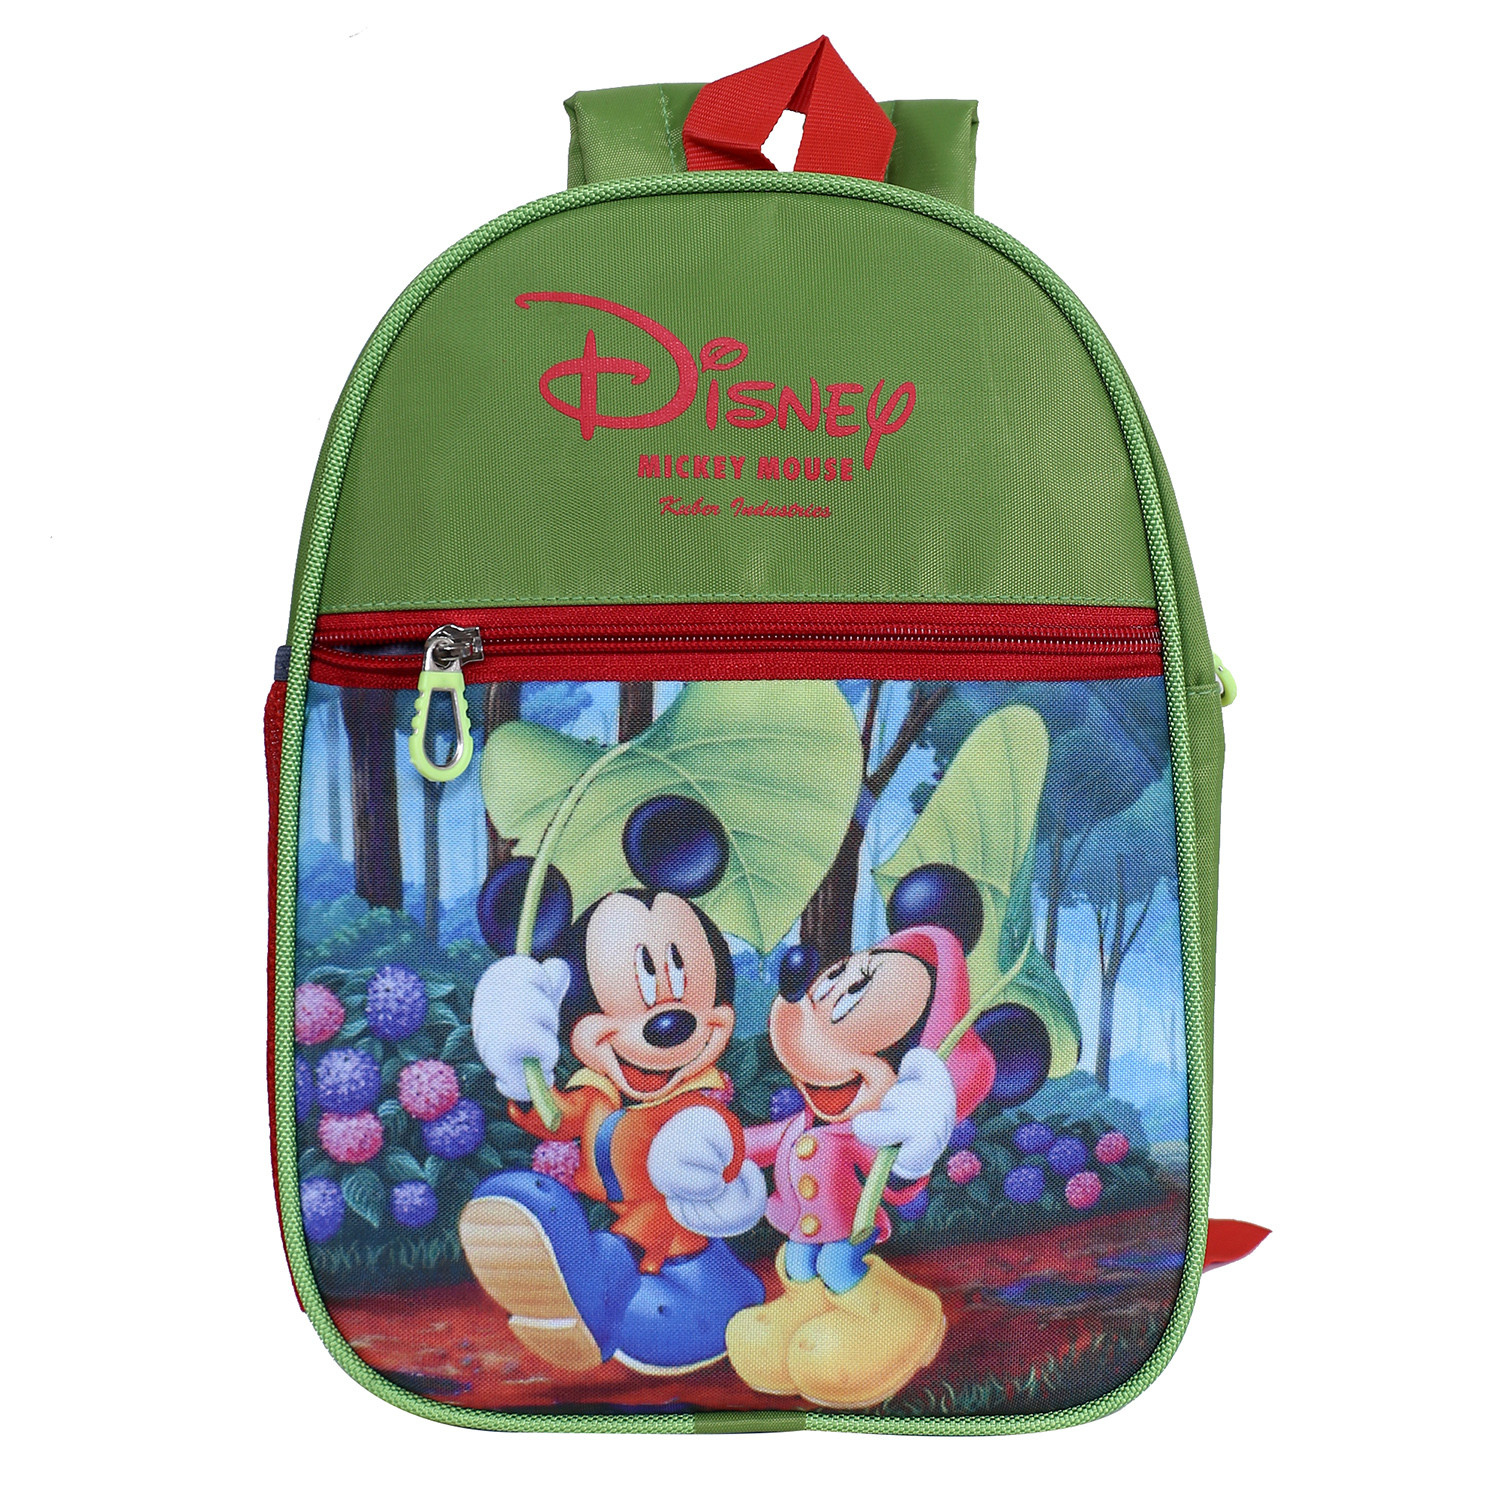 Kuber Industries Disney Mickey & Minnie School Bag|2 Compartment Rexine School Bagpack|School Bag for Kids|School Bags for Girls with Zipper Closure|Small Size (Green)